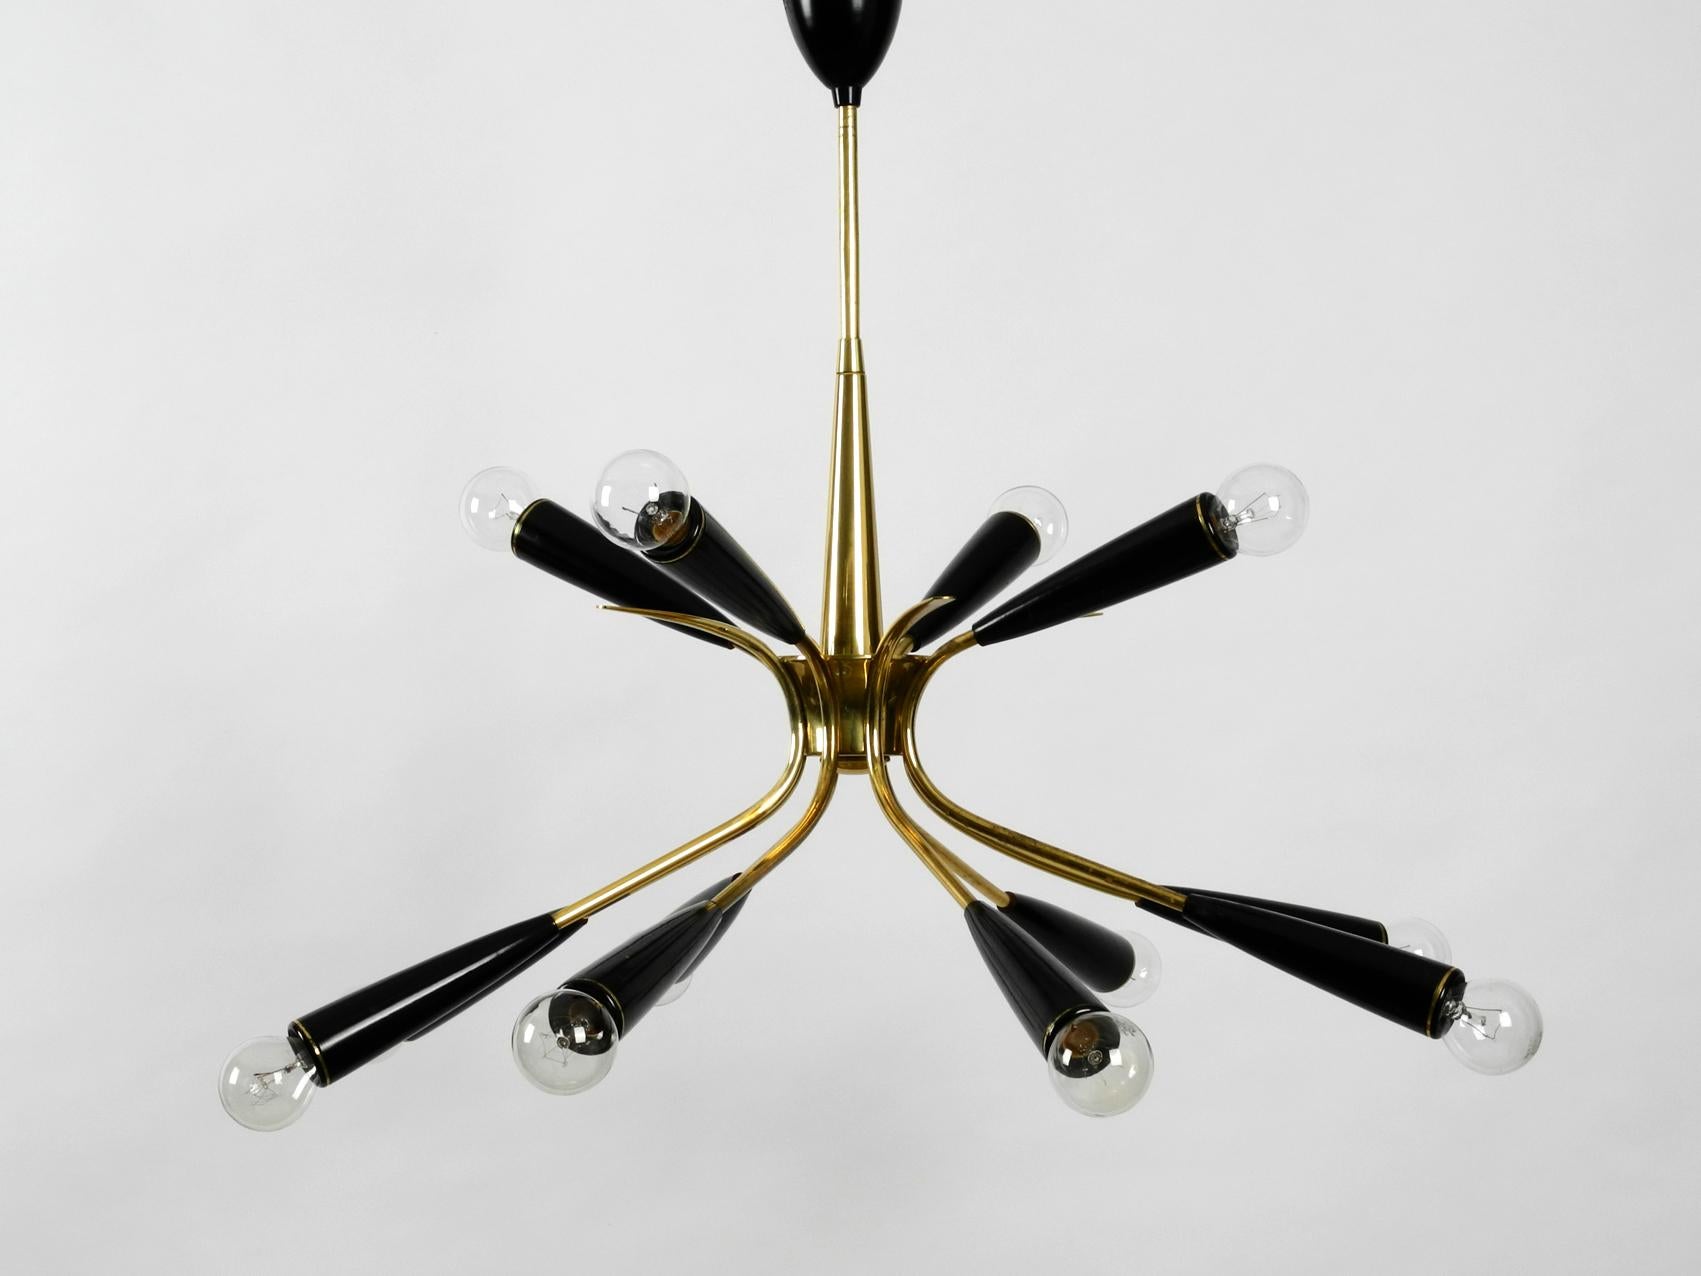 Mid-Century Modern Midcentury 12 Armed Sputnik Brass Ceiling Lamp with Cones Made of Bakalite